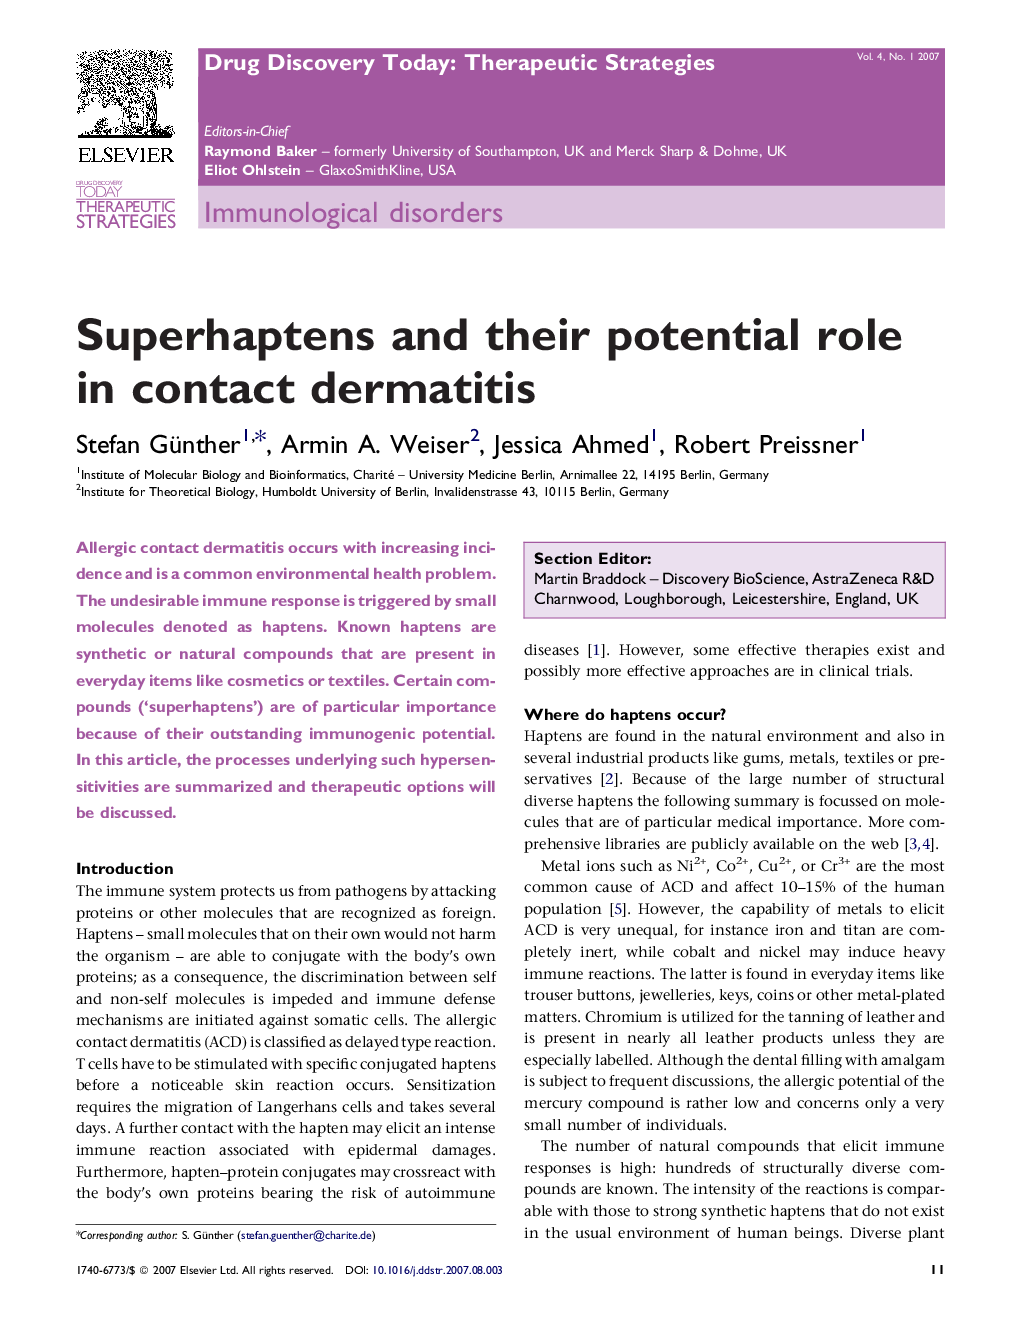 Superhaptens and their potential role in contact dermatitis